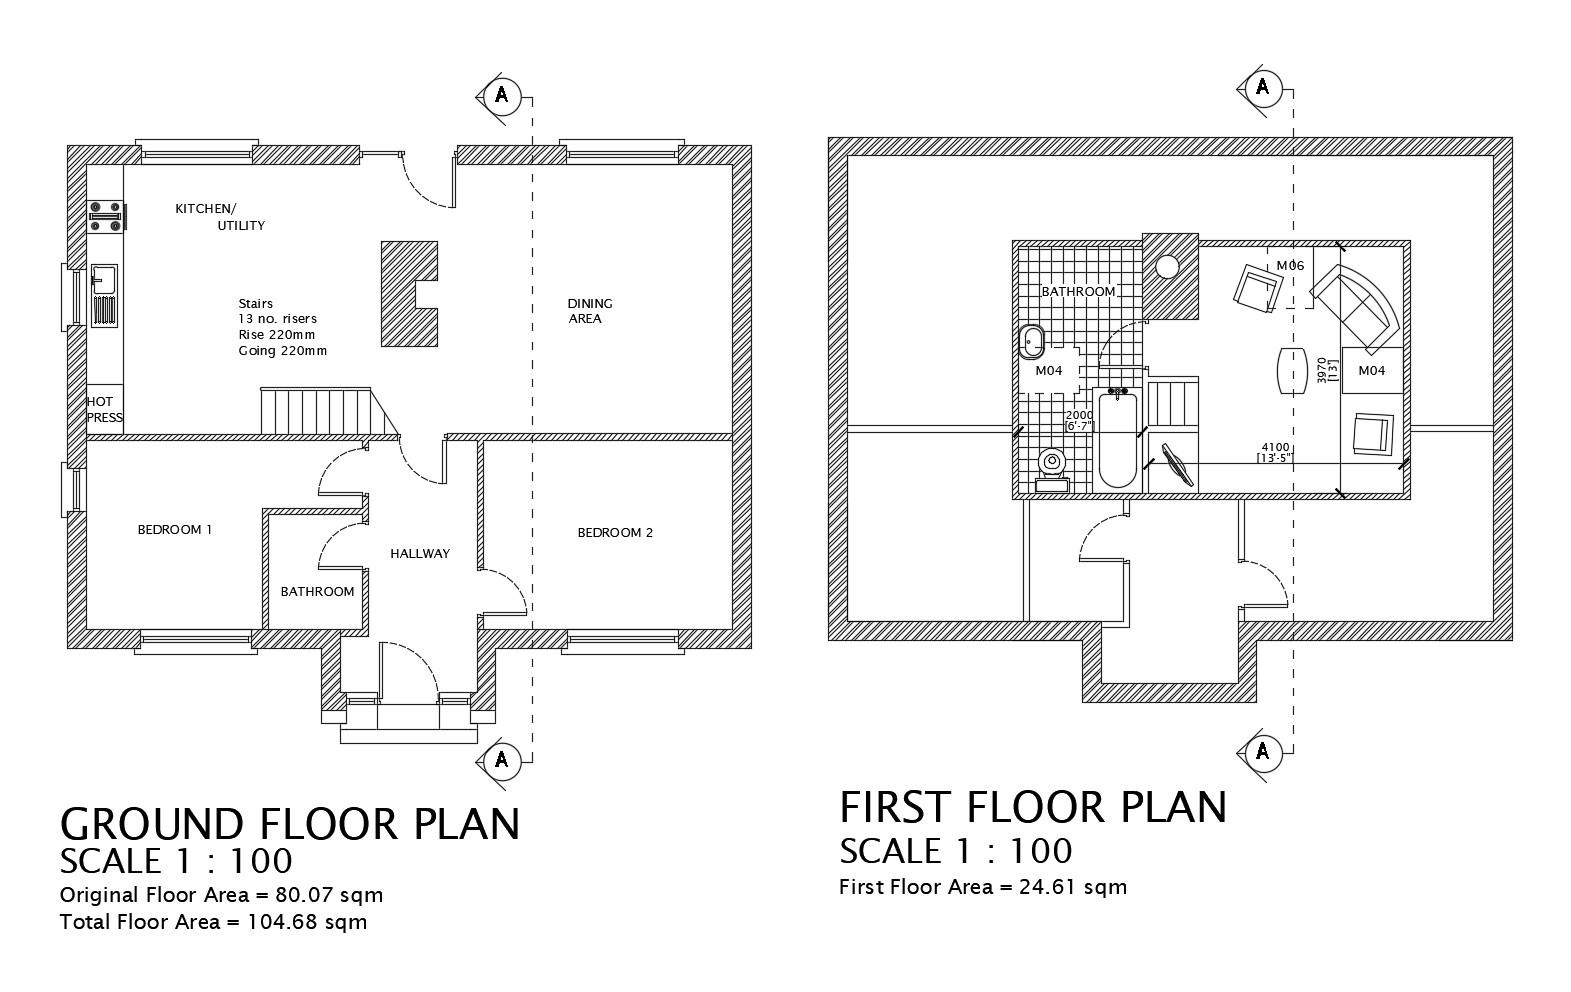 Floor plan of 2 storey residential house with detail dimension in